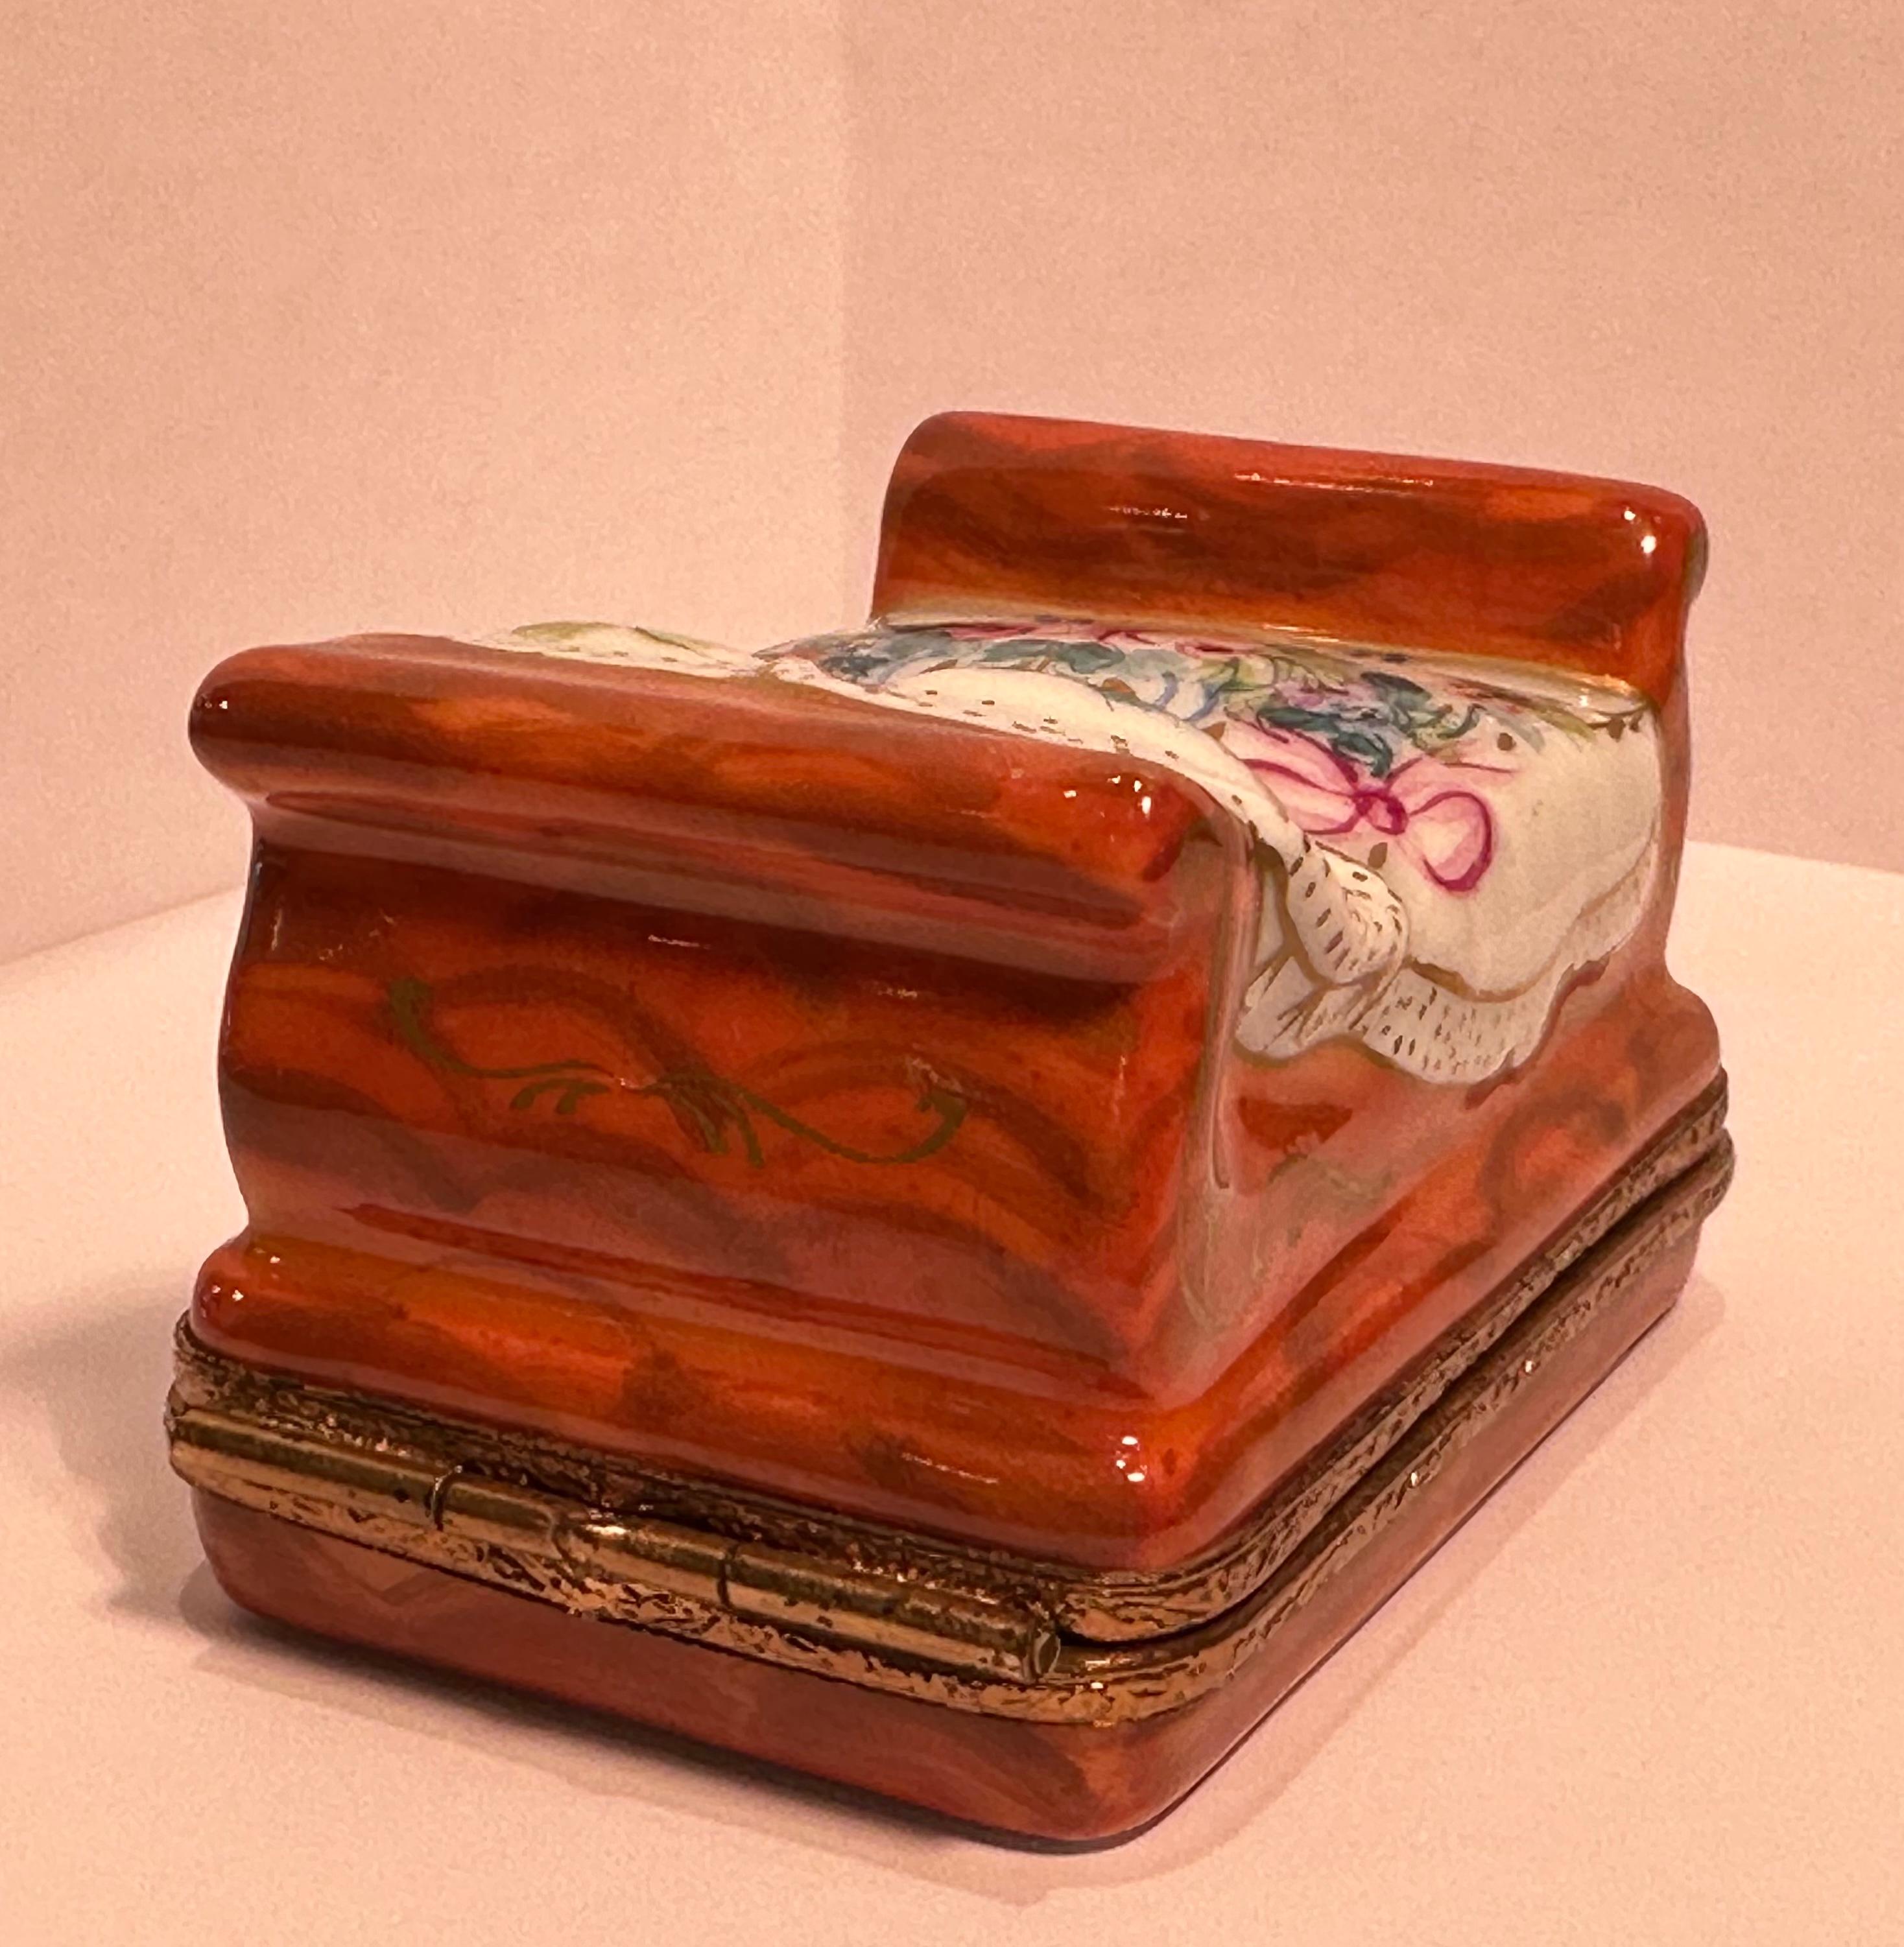 Collectible and very unique, Limoges porcelain miniature trinket box is handmade and hand painted in France and features a very detailed French style sleigh bed with hand painted scroll motifs.  The fancy antique gold gilt finish ormolu mounts add